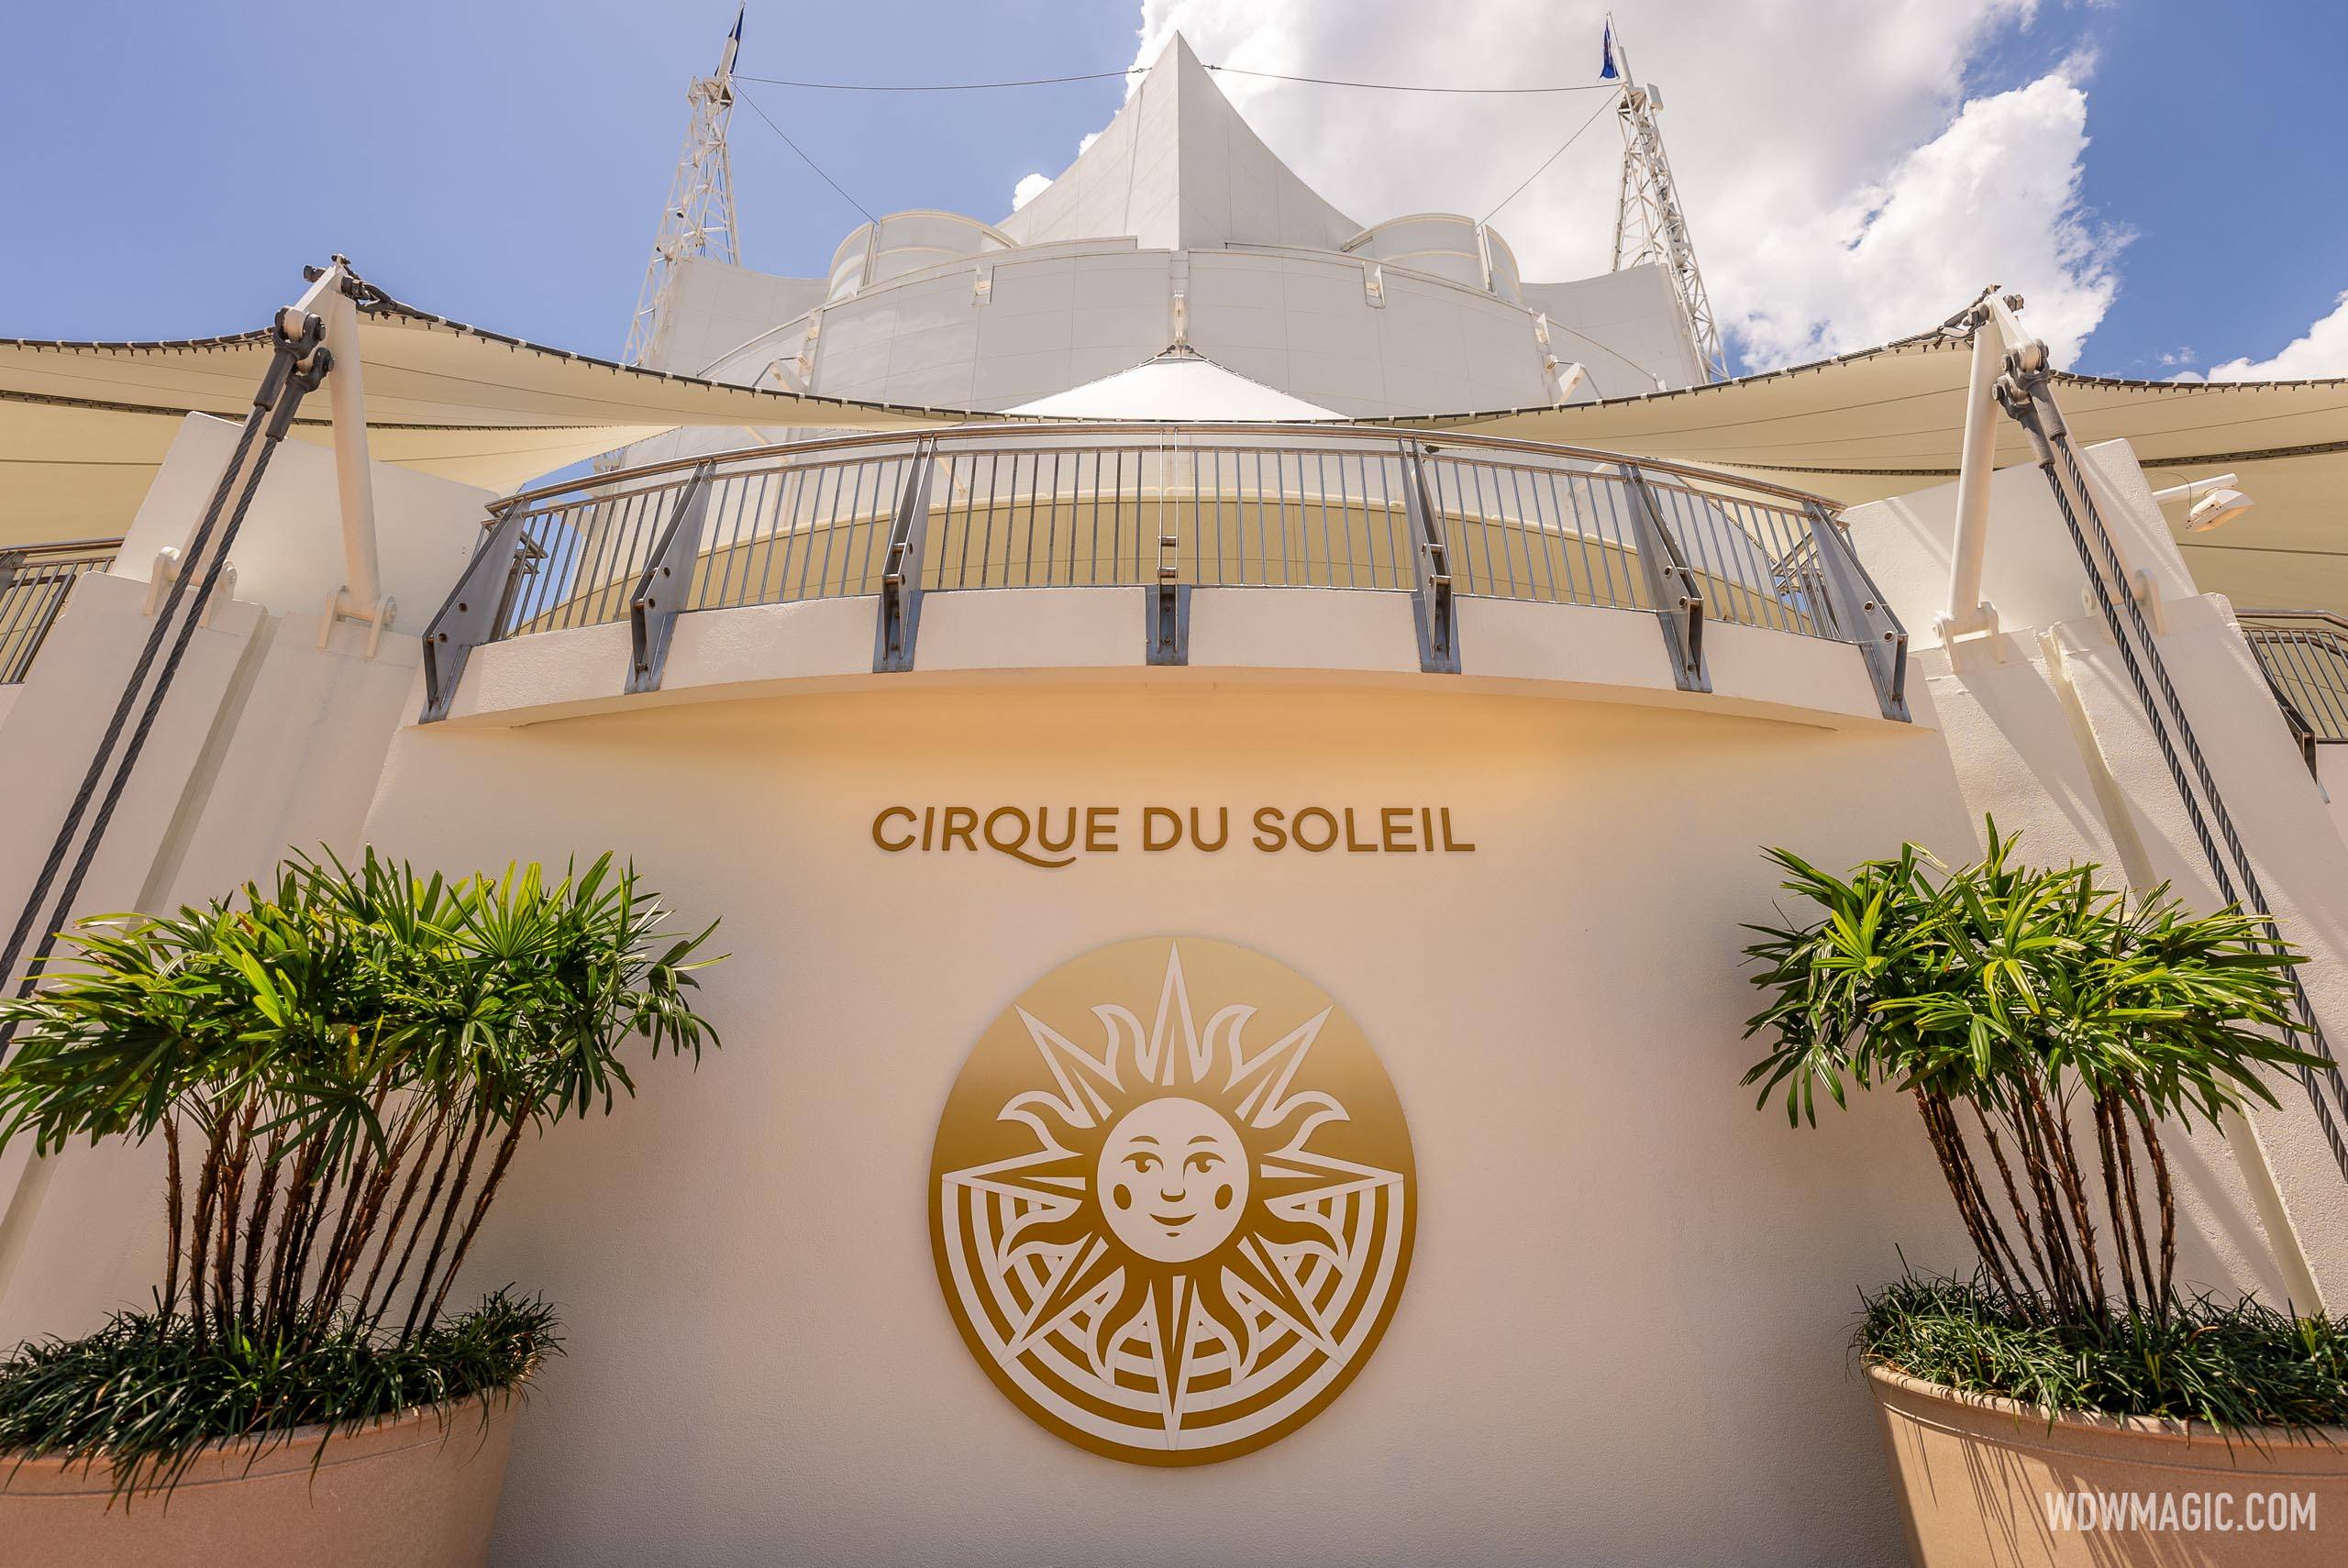 'Page to Stage Signature Experience' backstage tour at Drawn to Life by Cirque du Soleil